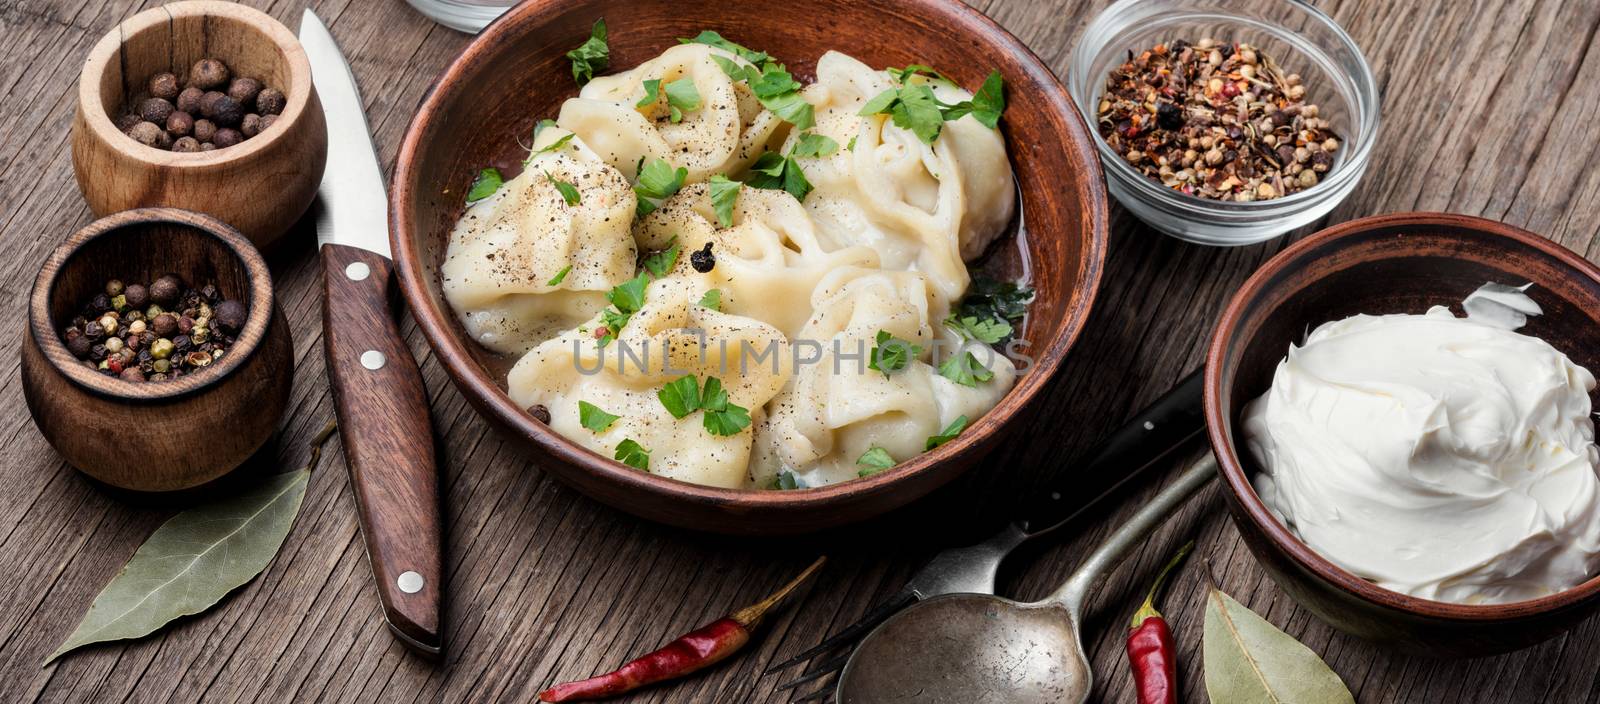 Delicious dumplings in the bowl on the table